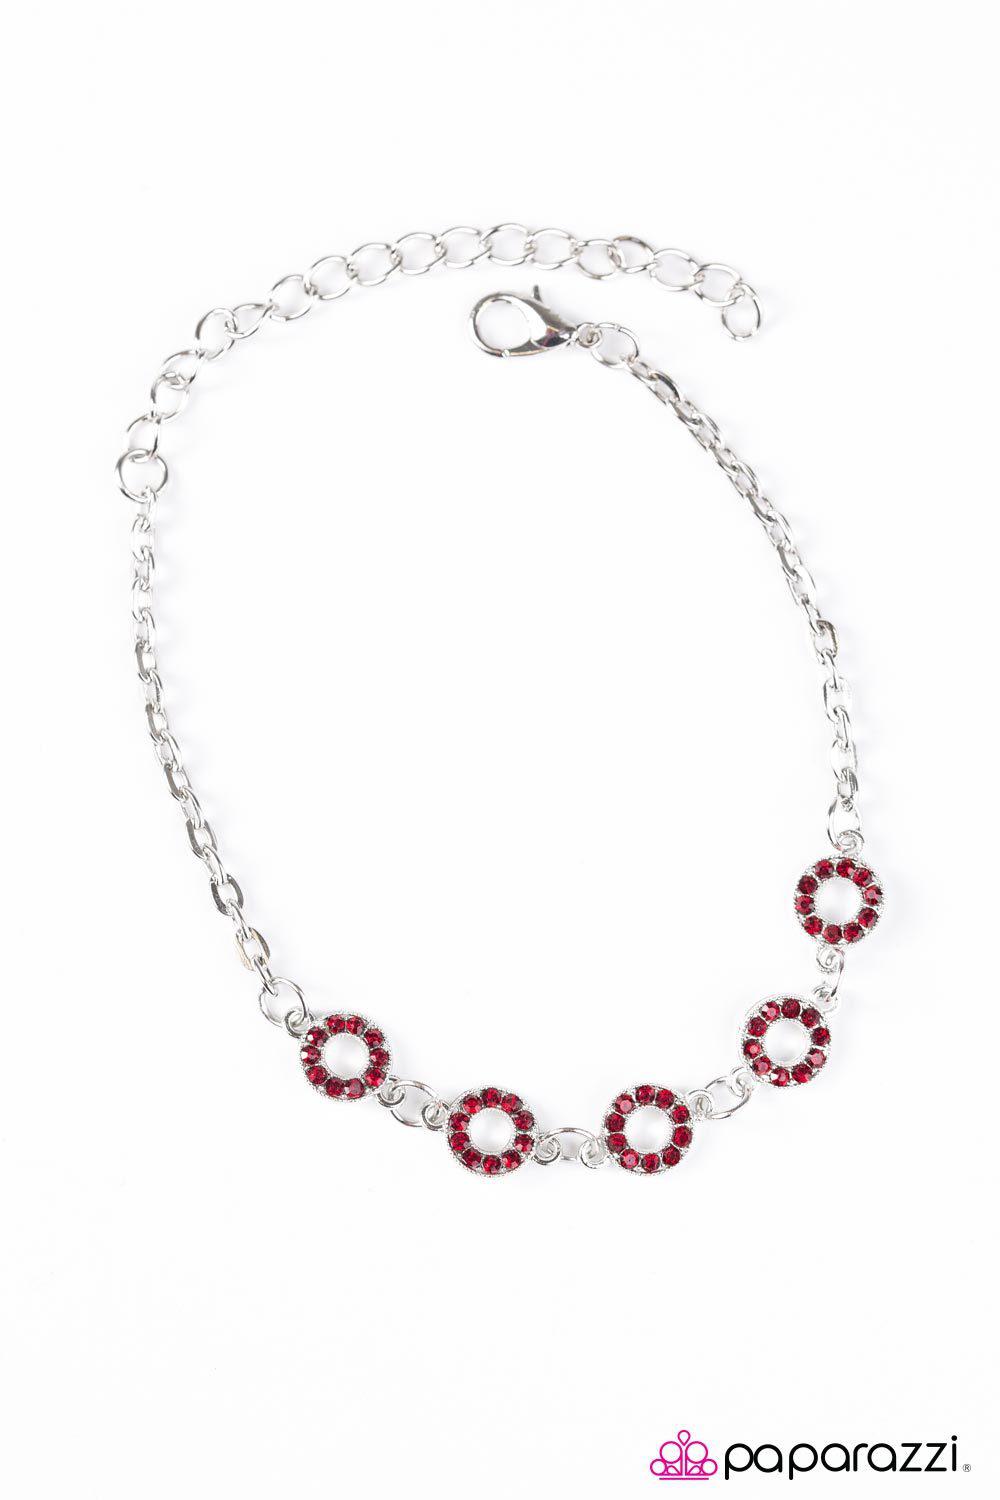 This Time Around Red Gem Bracelet - Paparazzi Accessories-CarasShop.com - $5 Jewelry by Cara Jewels